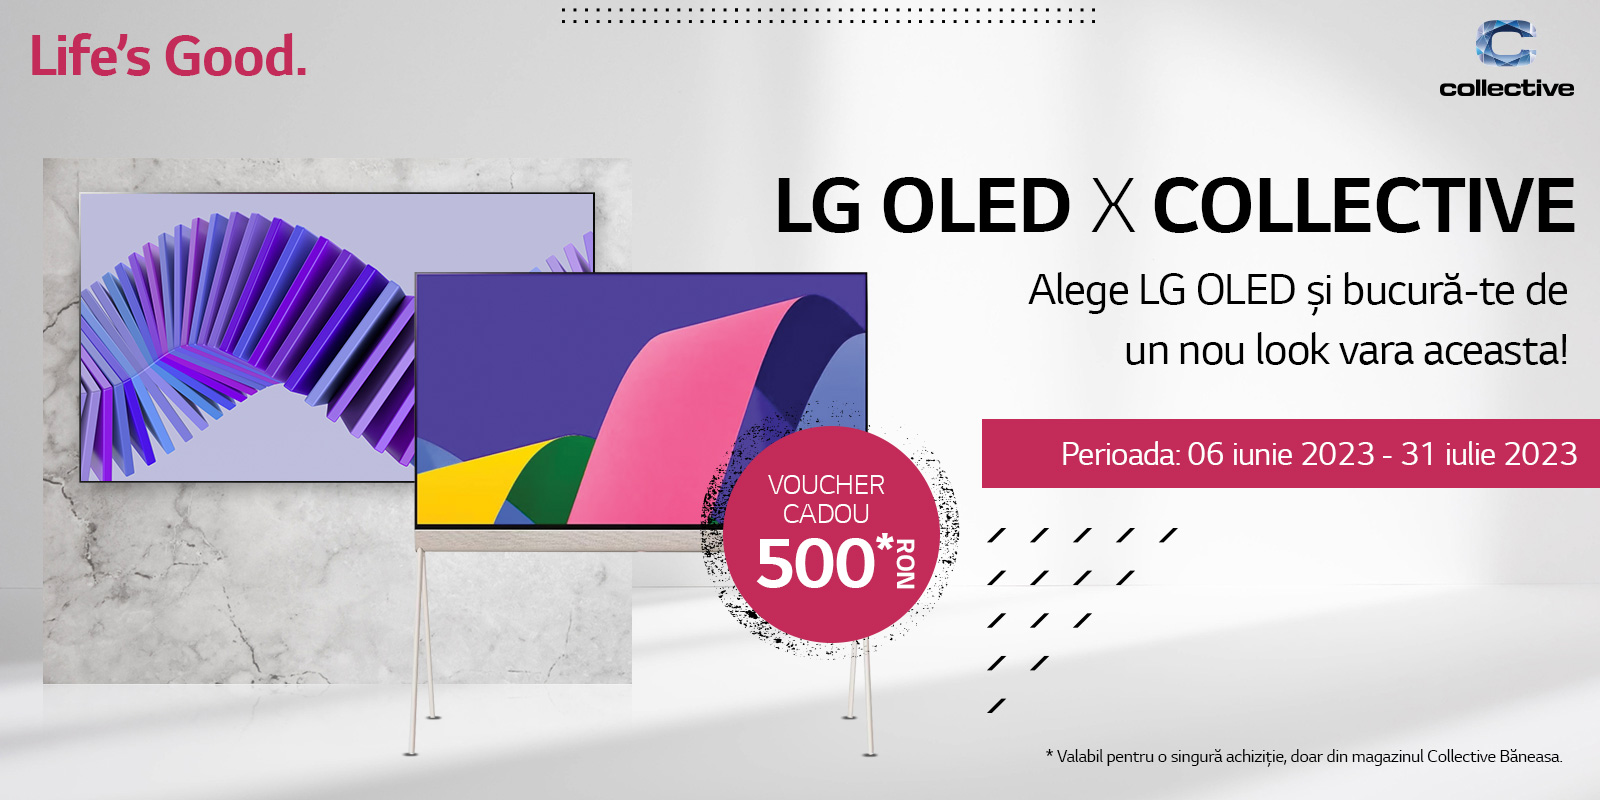 LG OLED X COLLECTIVE